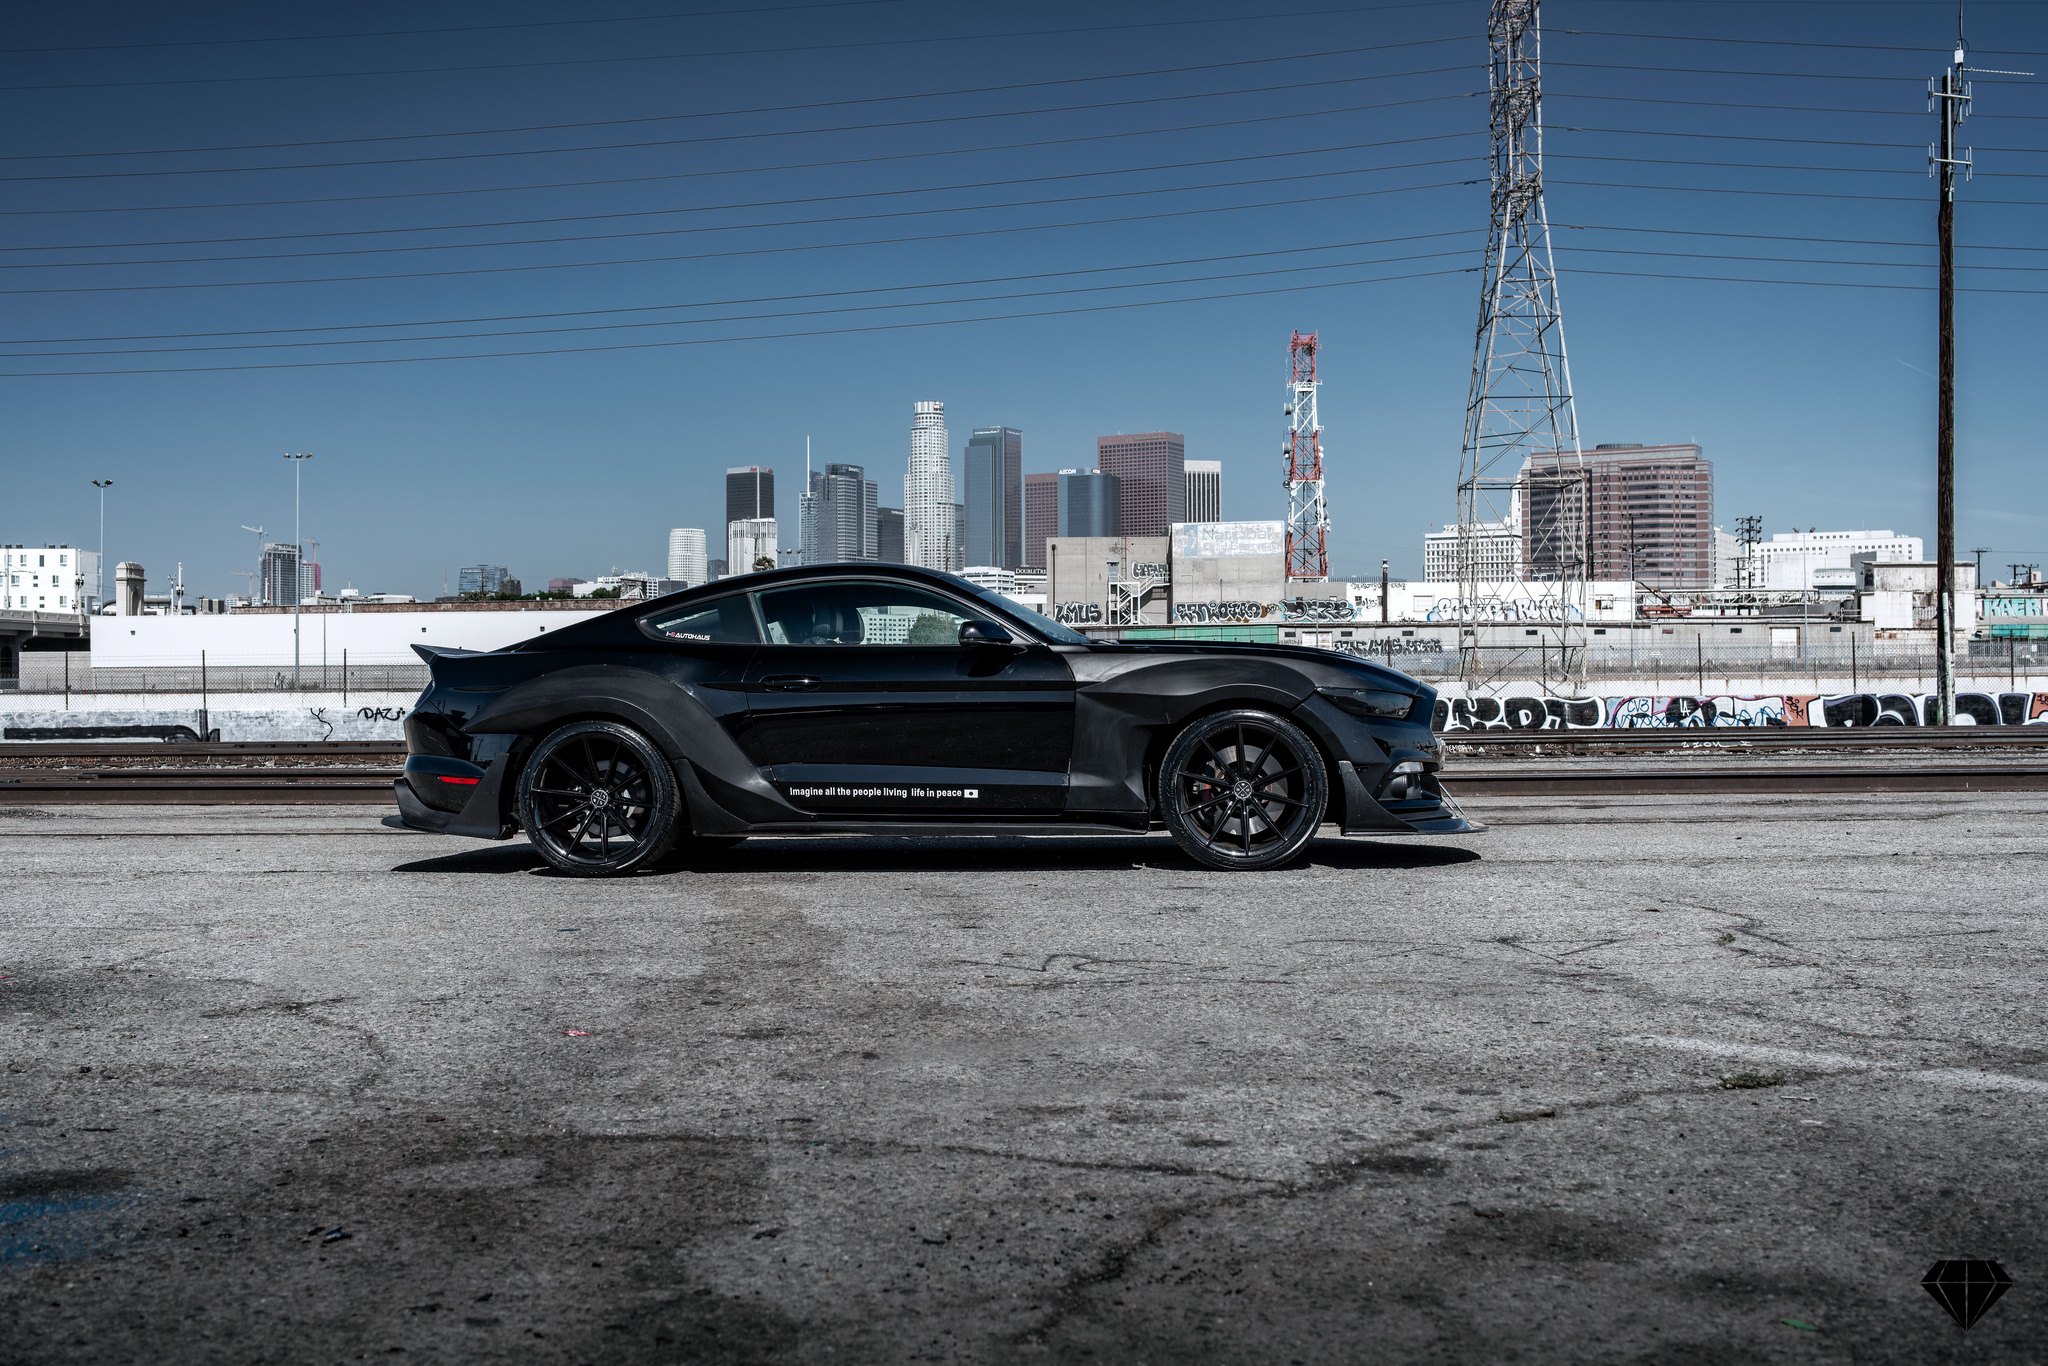 Carbon Fiber Side Skirts on Black Ford Mustang GT - Photo by Blaque Diamond Wheels